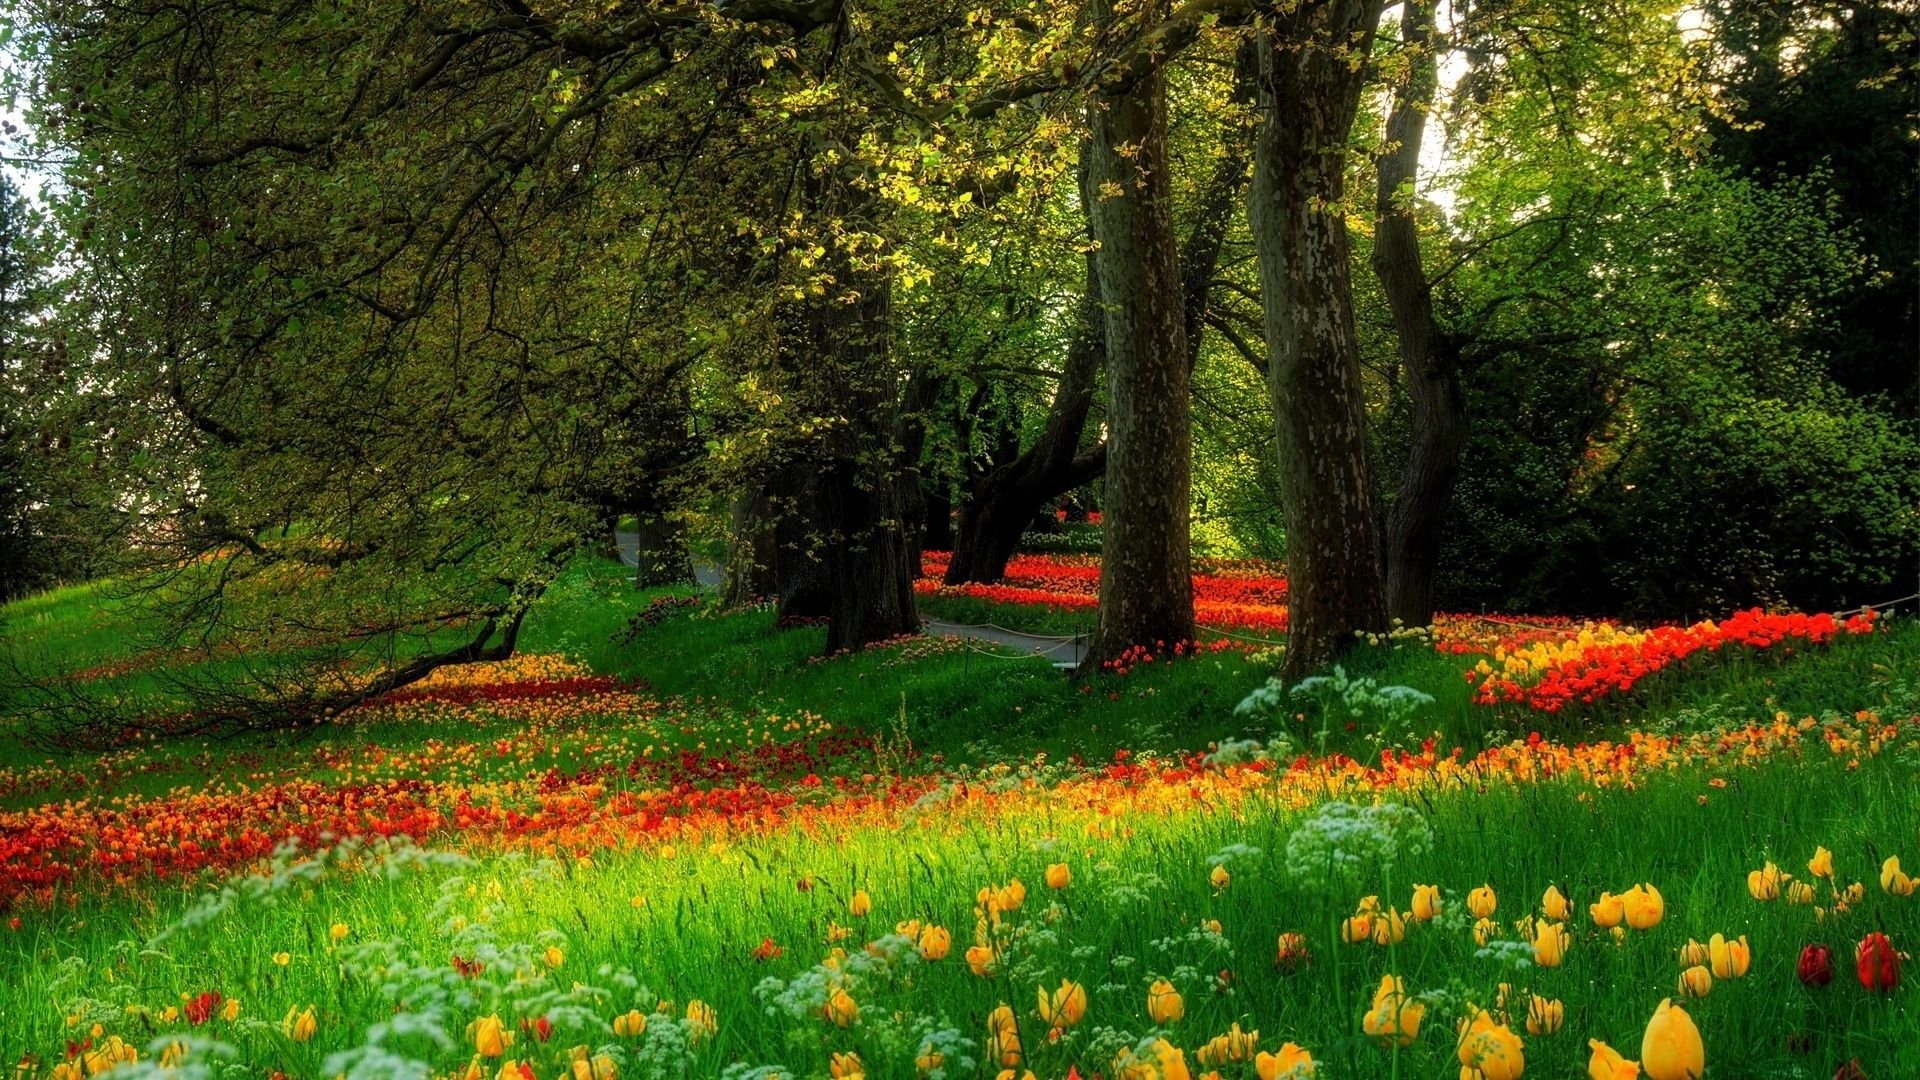 Blooming Flowers in Park HD Wallpaper. Background Image